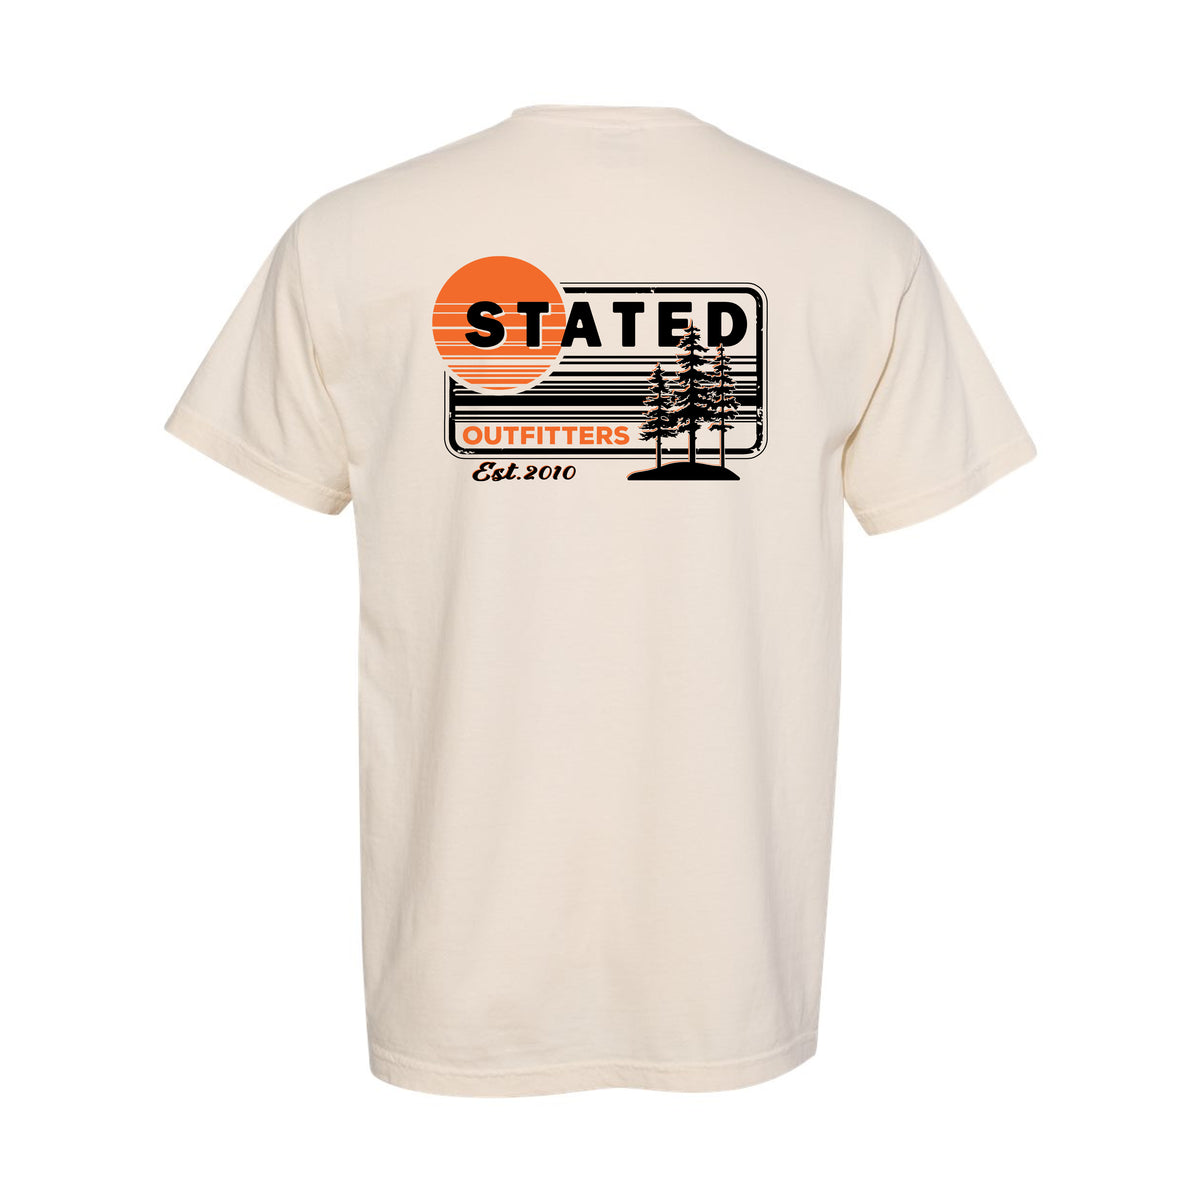 Stated Outfitters License Plate T-Shirt